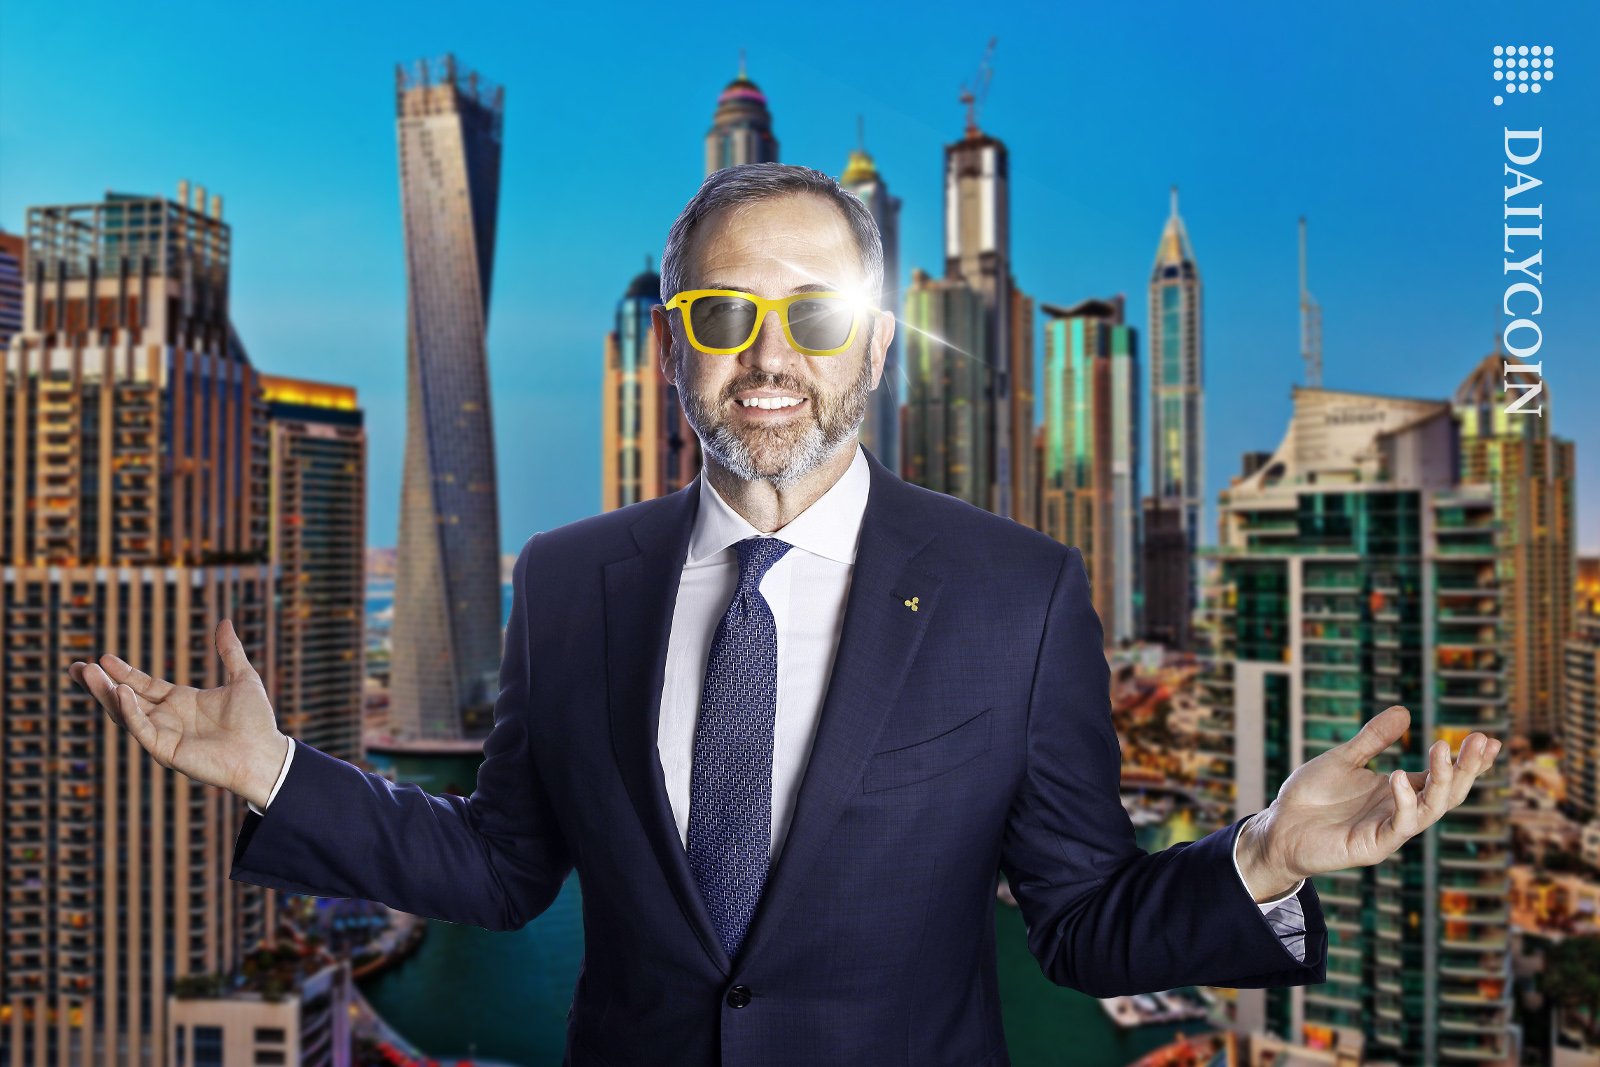 Bred Garlinghouse in Dubai wearing golden sunglasses, looking confident.